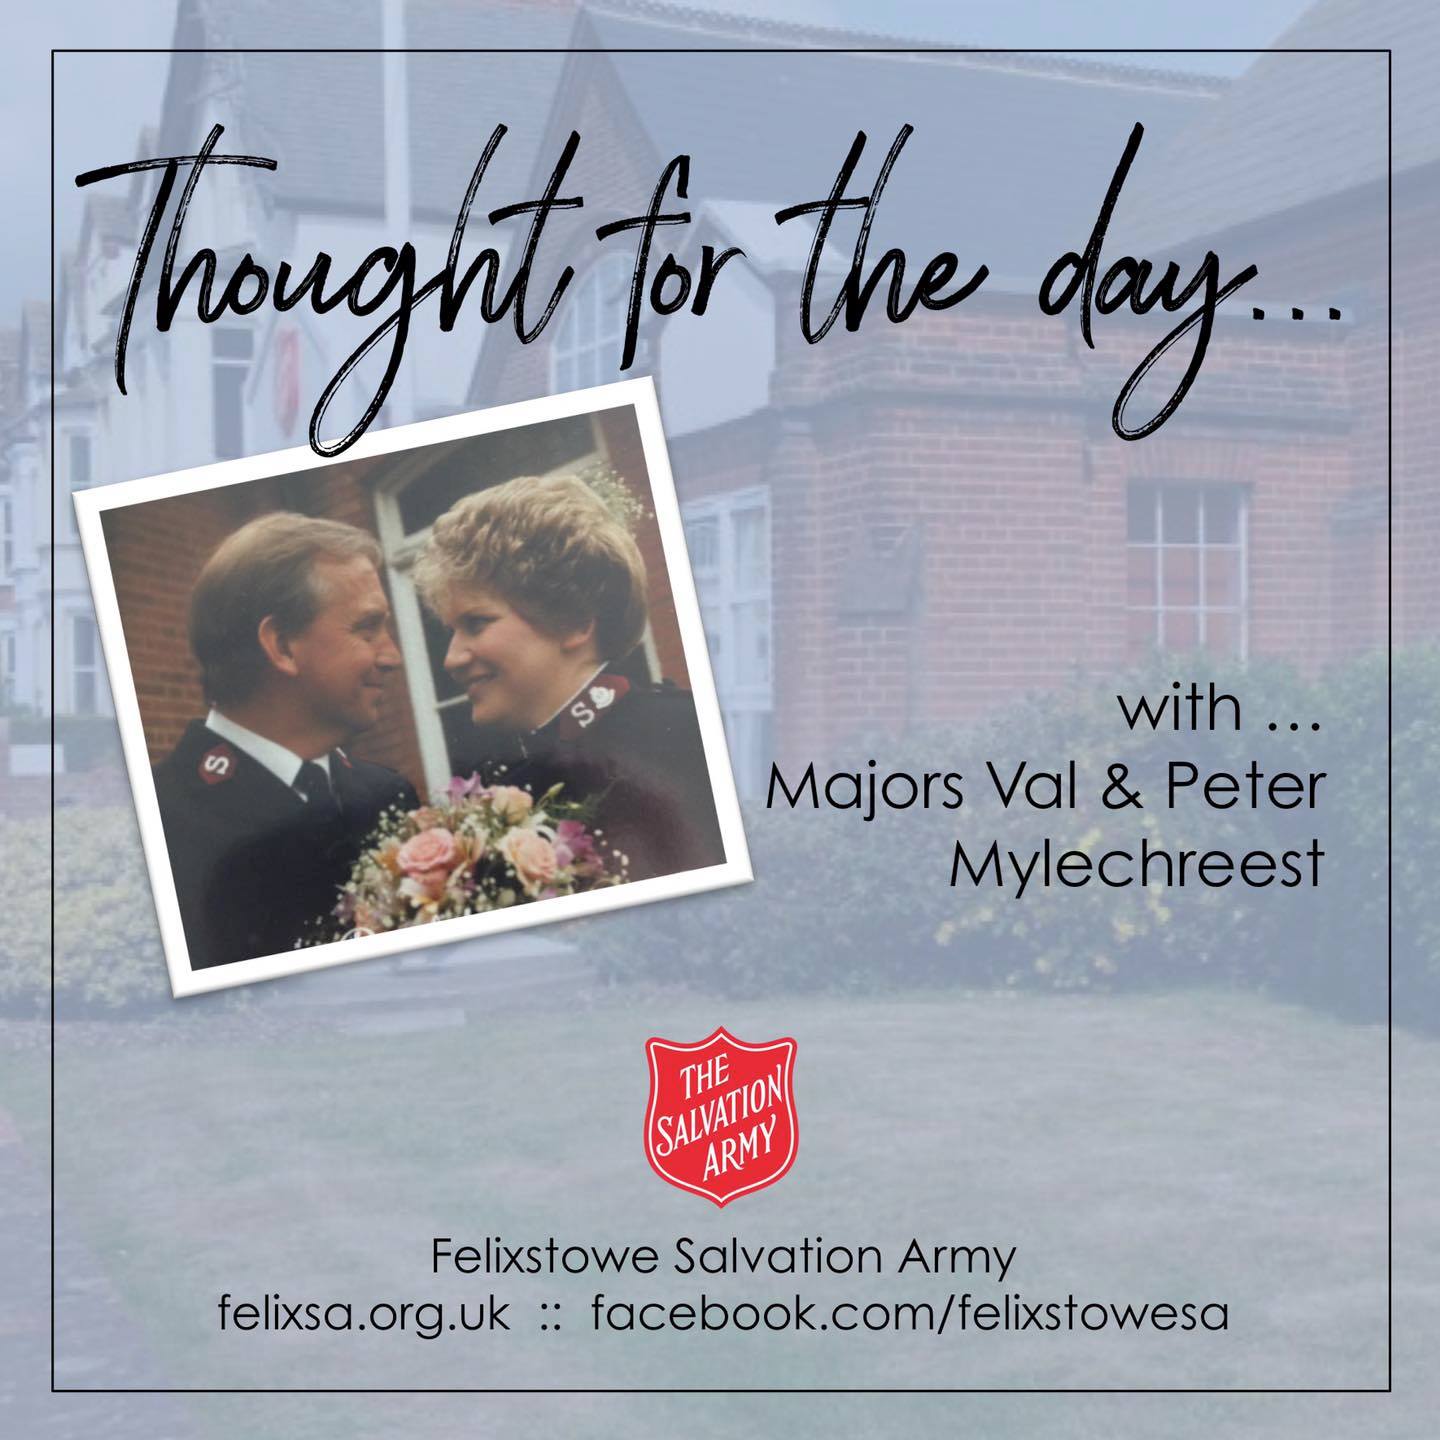 Thought for the Day with Majors Val & Peter Mylechreest